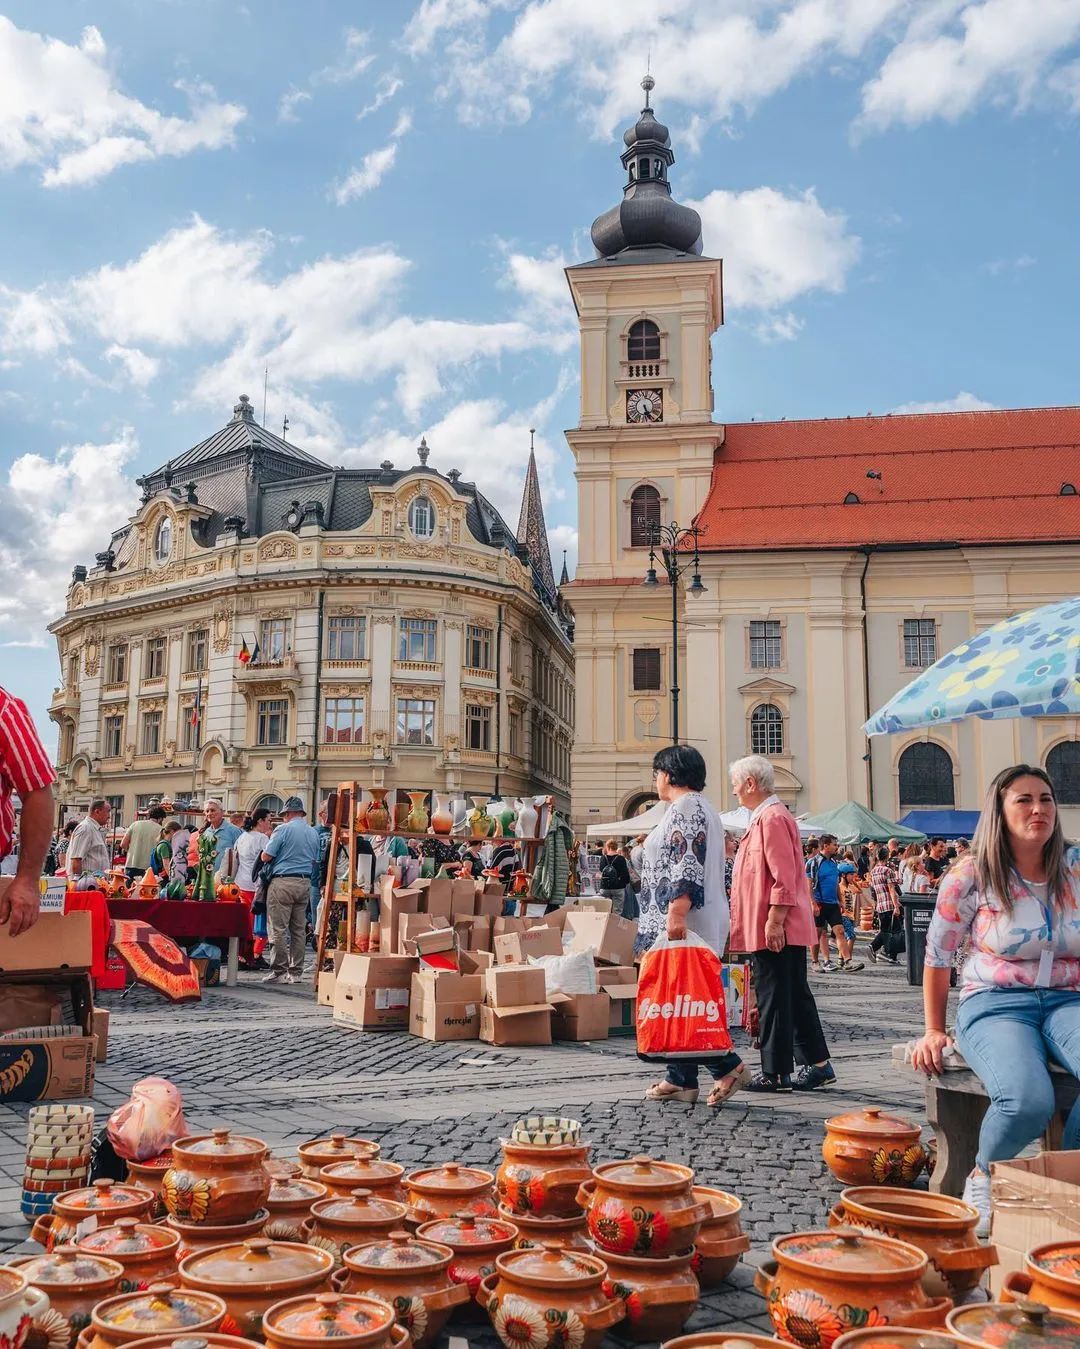 A large ceramics and pottery festival at Sibiu - Transylvania - Interesting Facts To Know